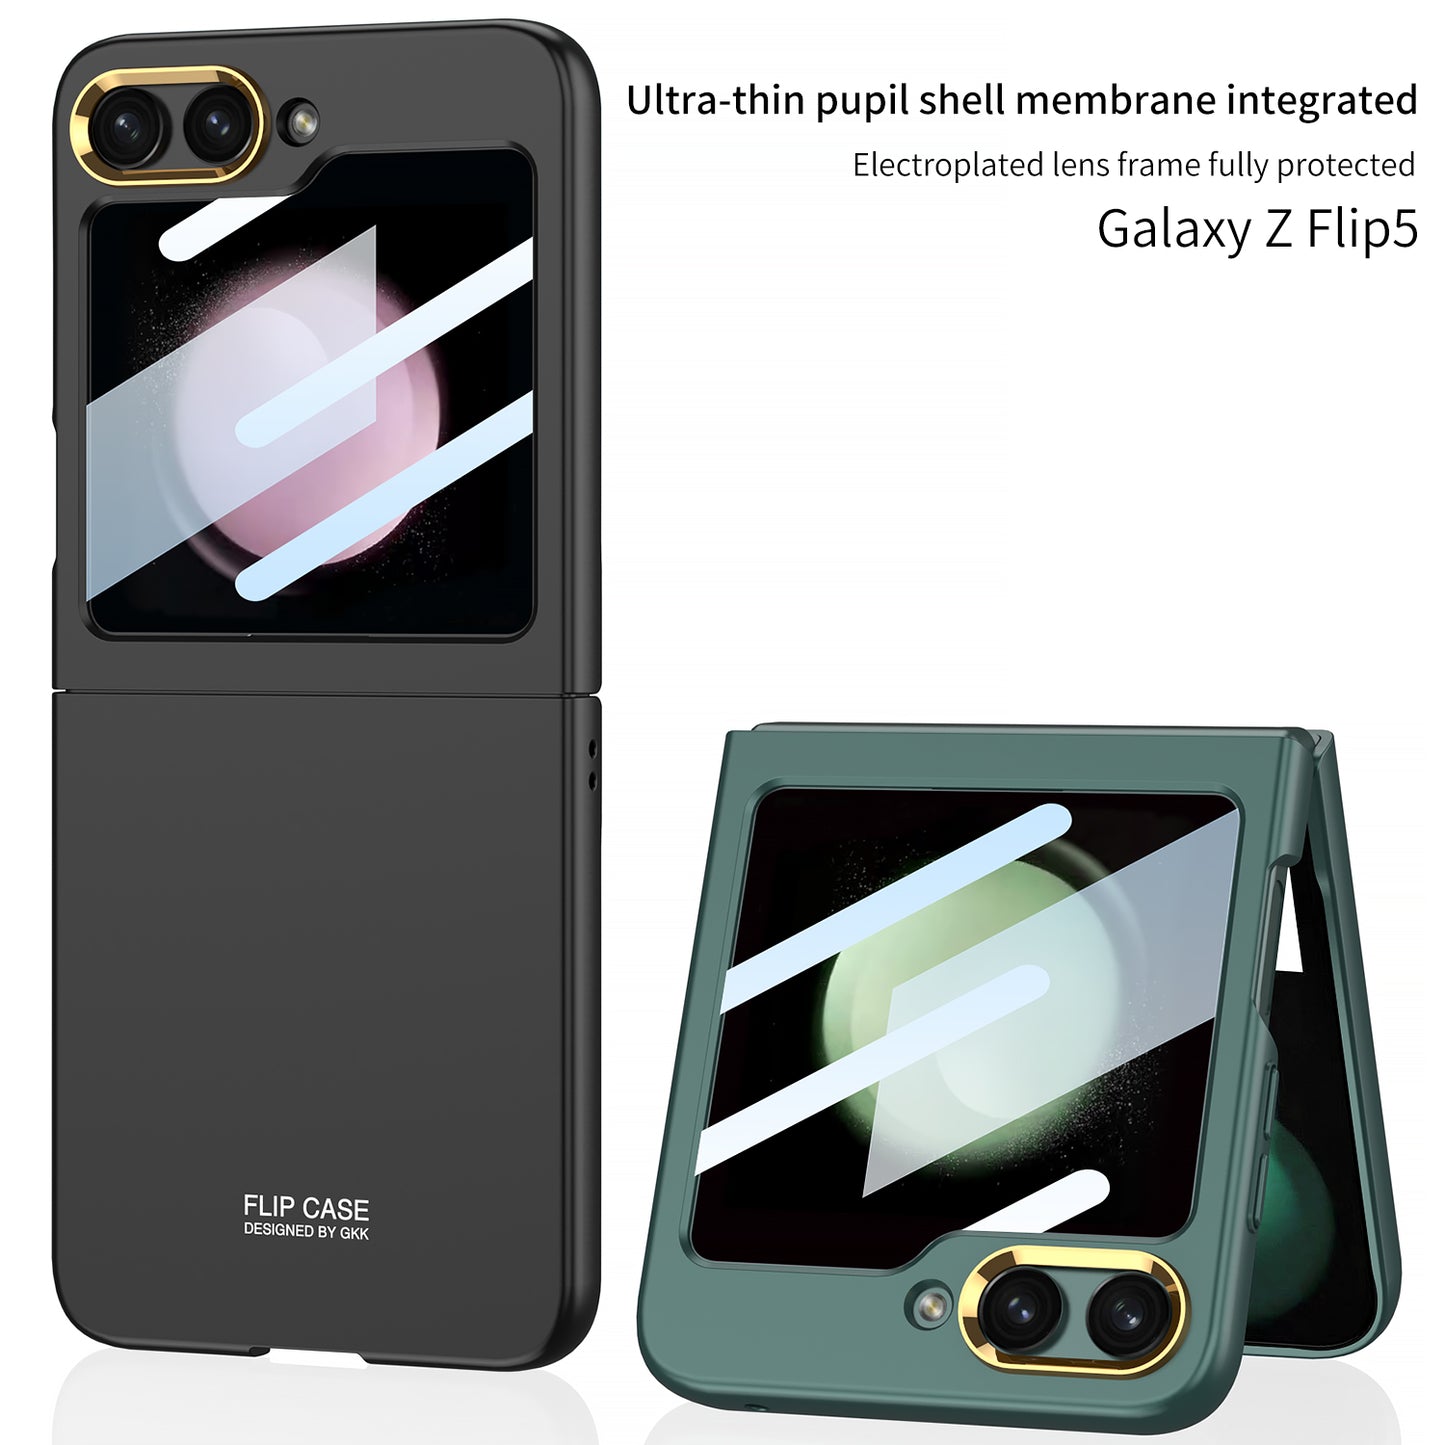 Samsung Galaxy Z Flip5 Ultra-thin Pupil Shell intergrated Case With Electroplated Lens Full Protected